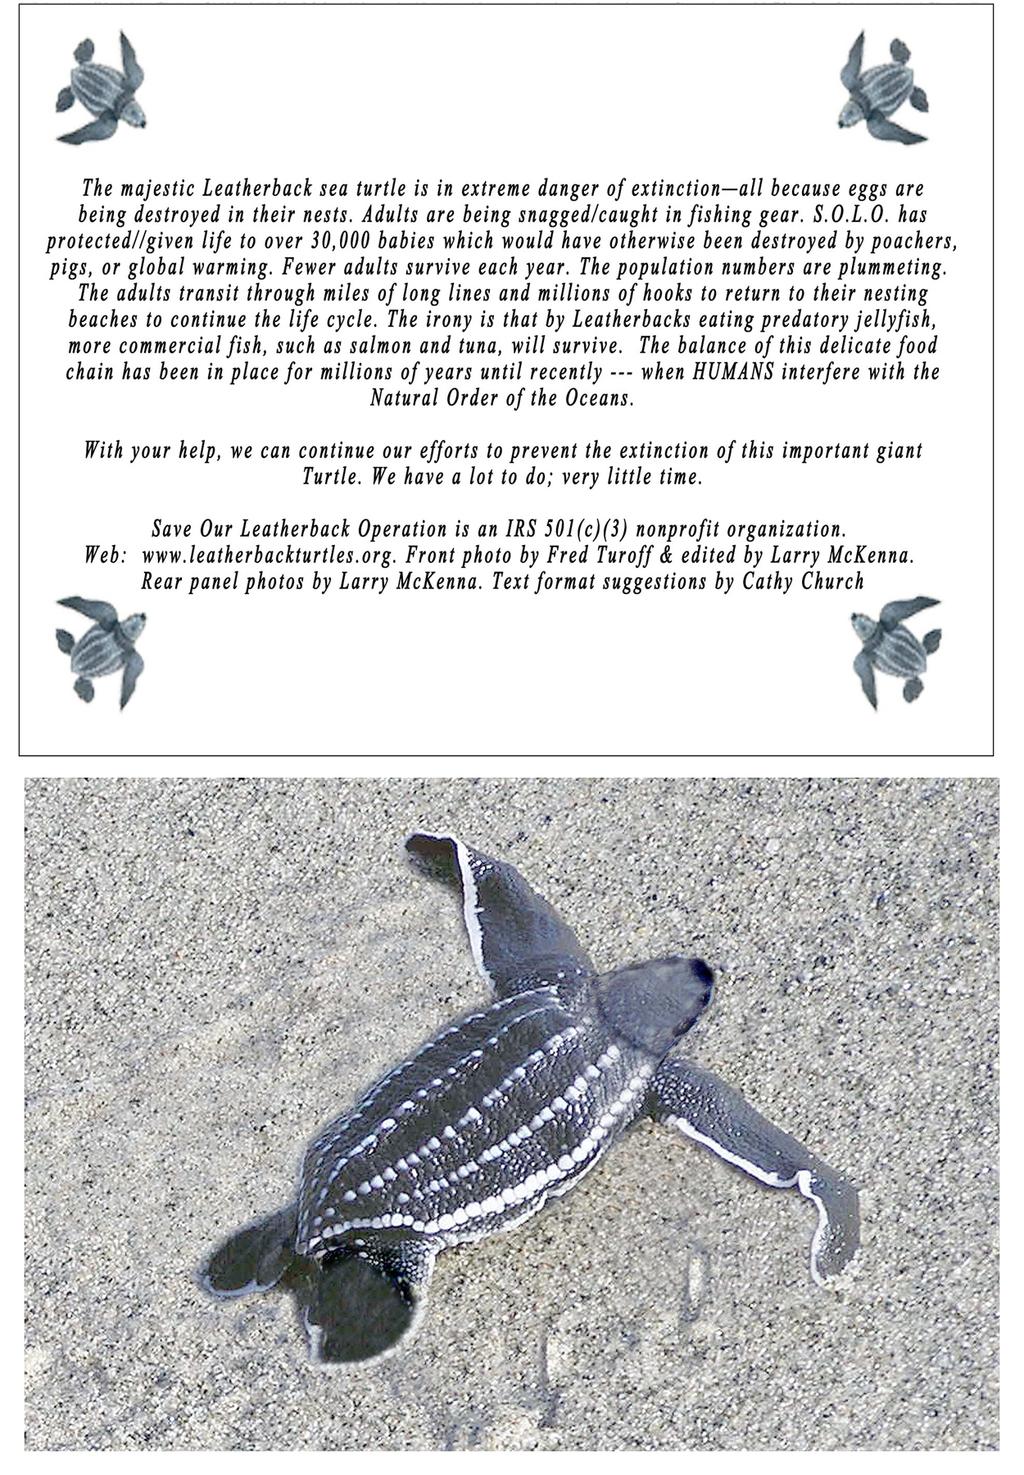 LBT064 Leatherback Notecards Set of 10 cards and